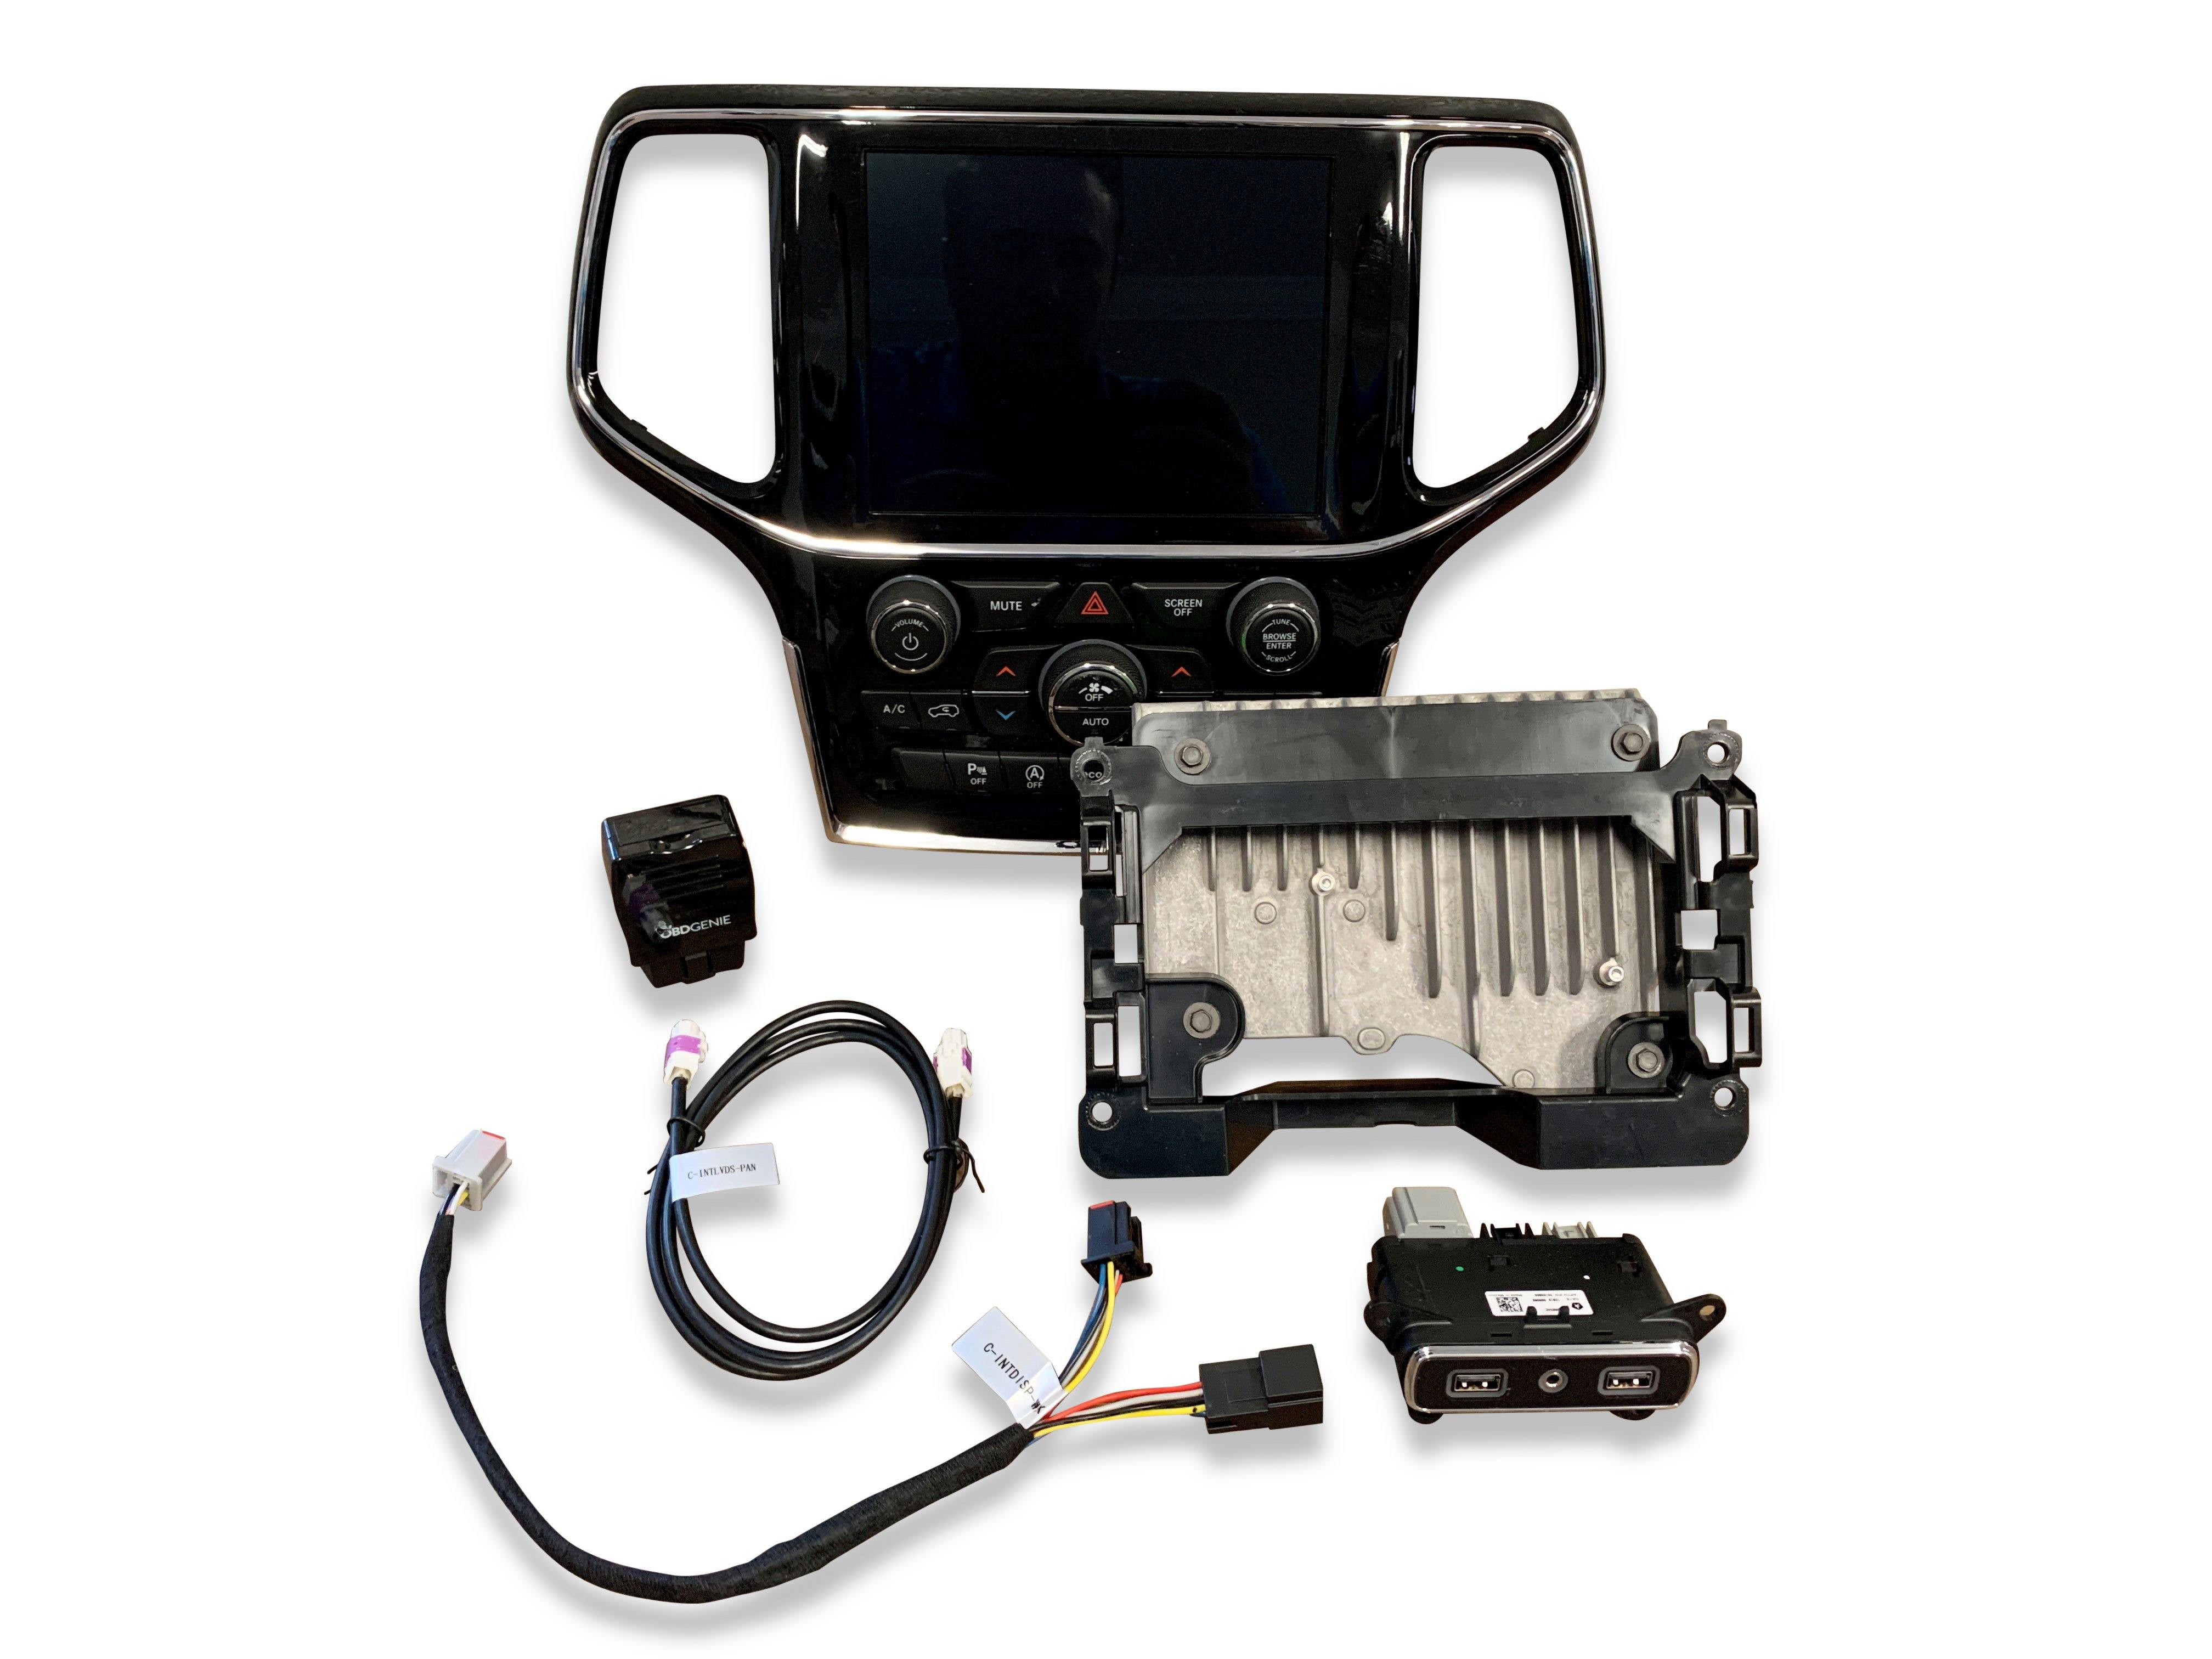 2012 jeep grand cherokee uconnect